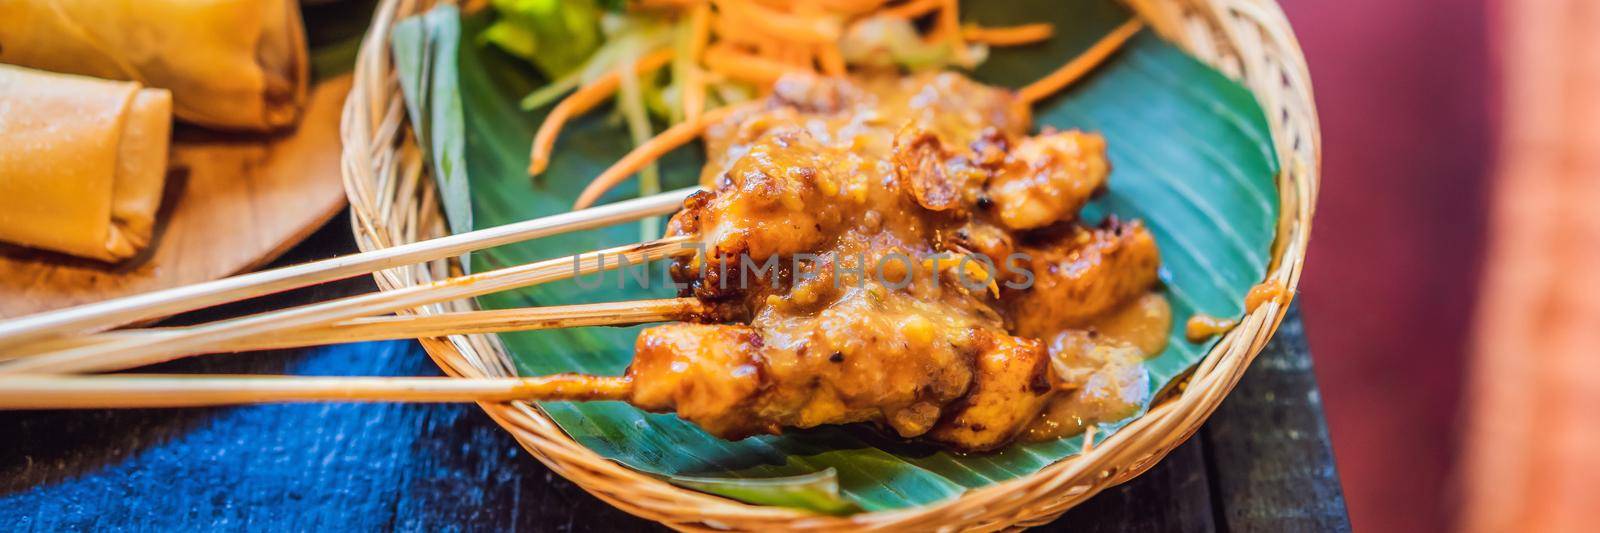 Satay or sate, skewered and grilled meat, served with peanut sauce, cucumber and ketupat. Traditional Malaysian and Indonesian food. Asian cuisine BANNER, LONG FORMAT by galitskaya